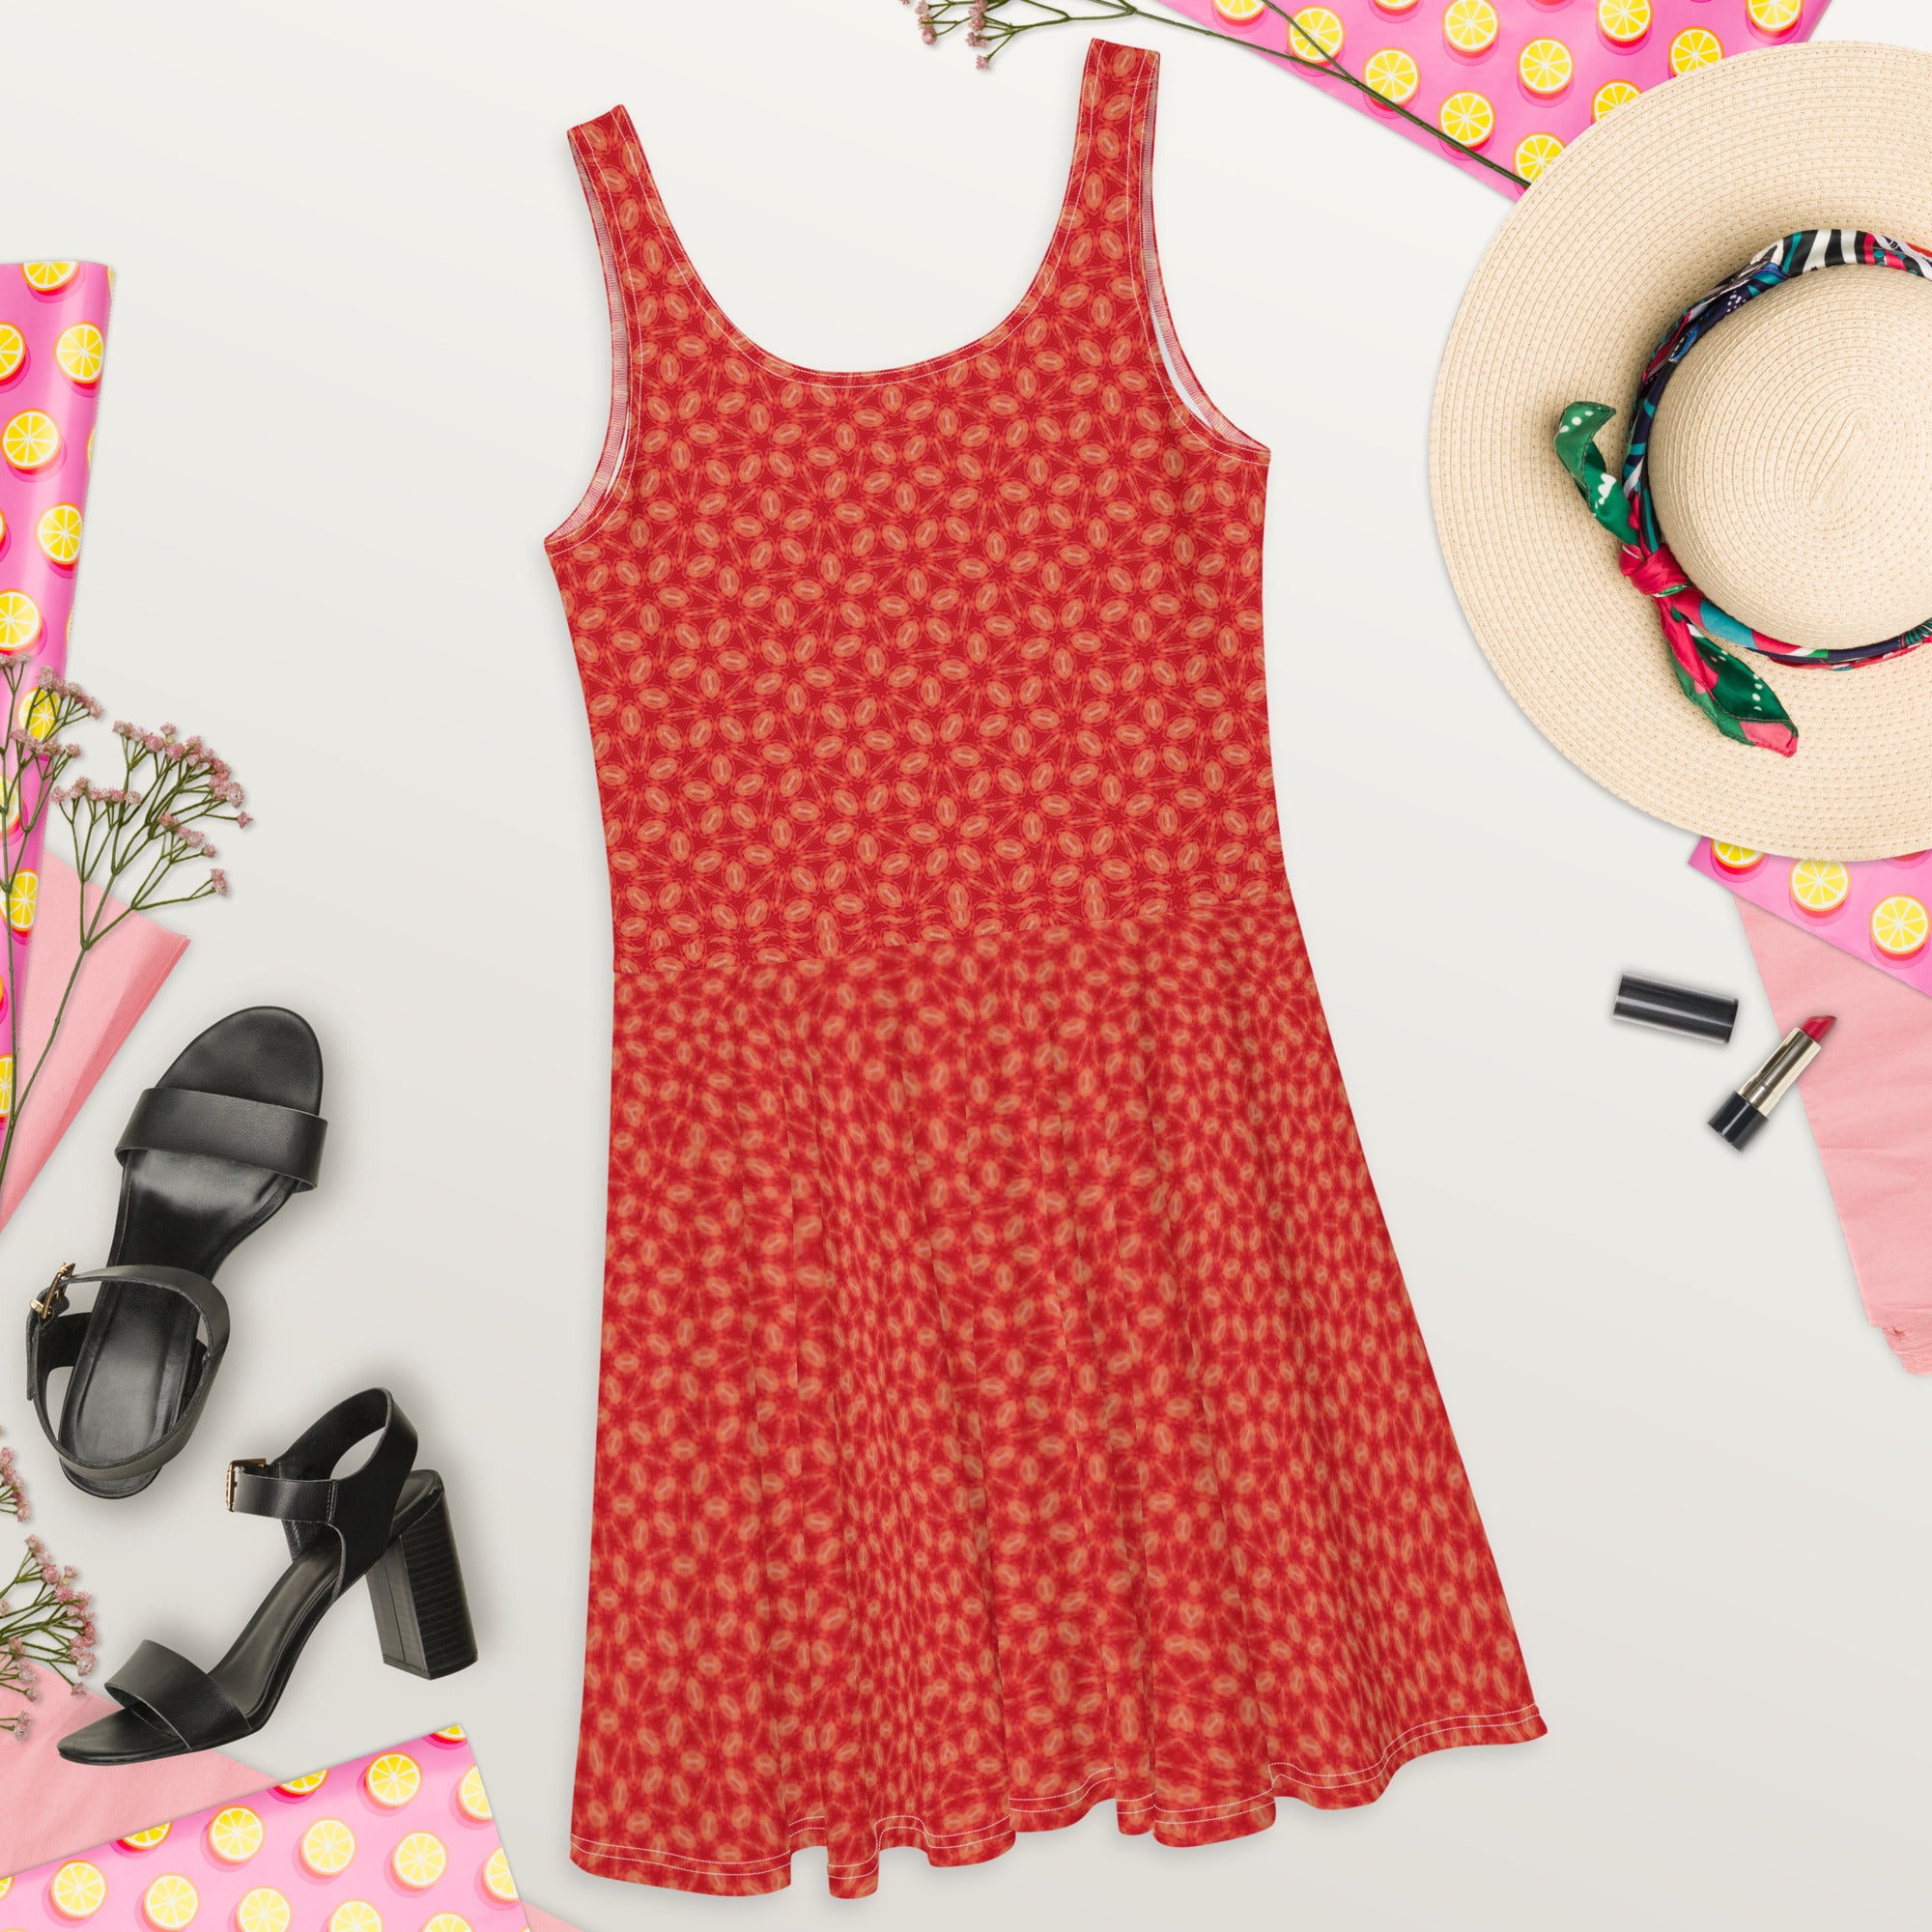 Happy Red Buttercup Skater Dress, by Sensus Studio Design